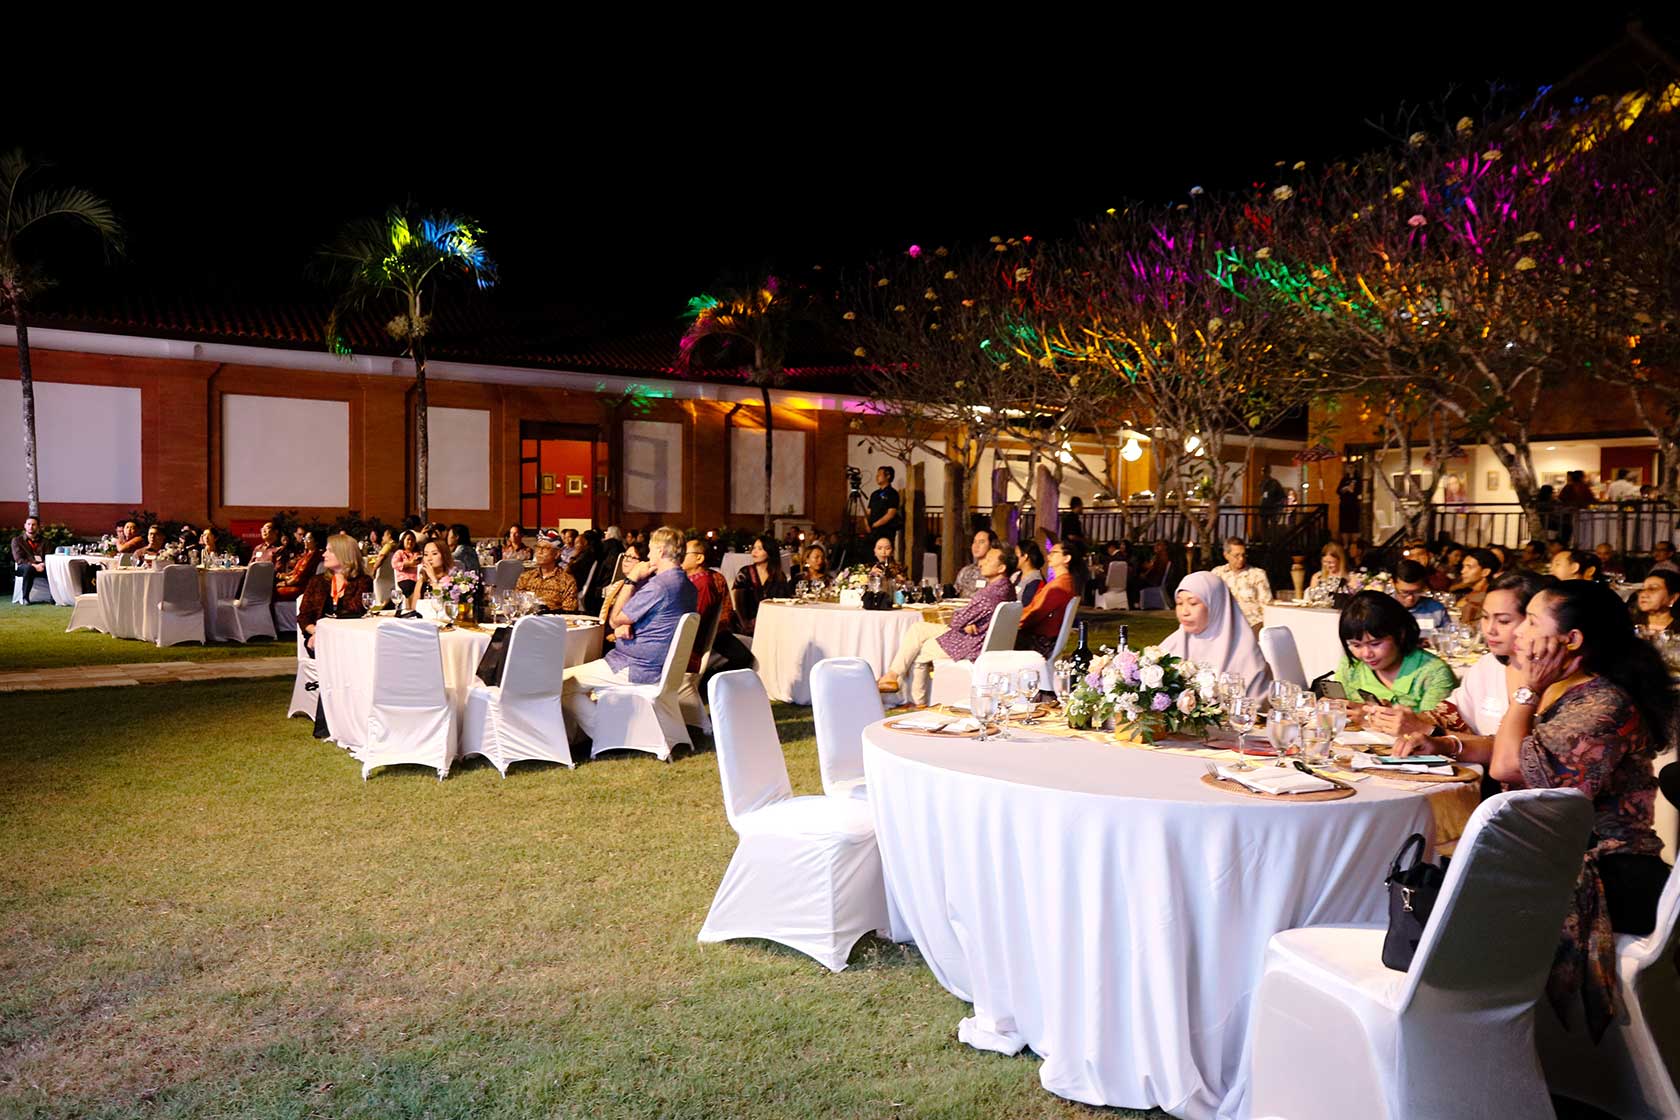 The Gala Dinner in Bali blossoms with a garden party theme, radiating a heartwarming ambience.